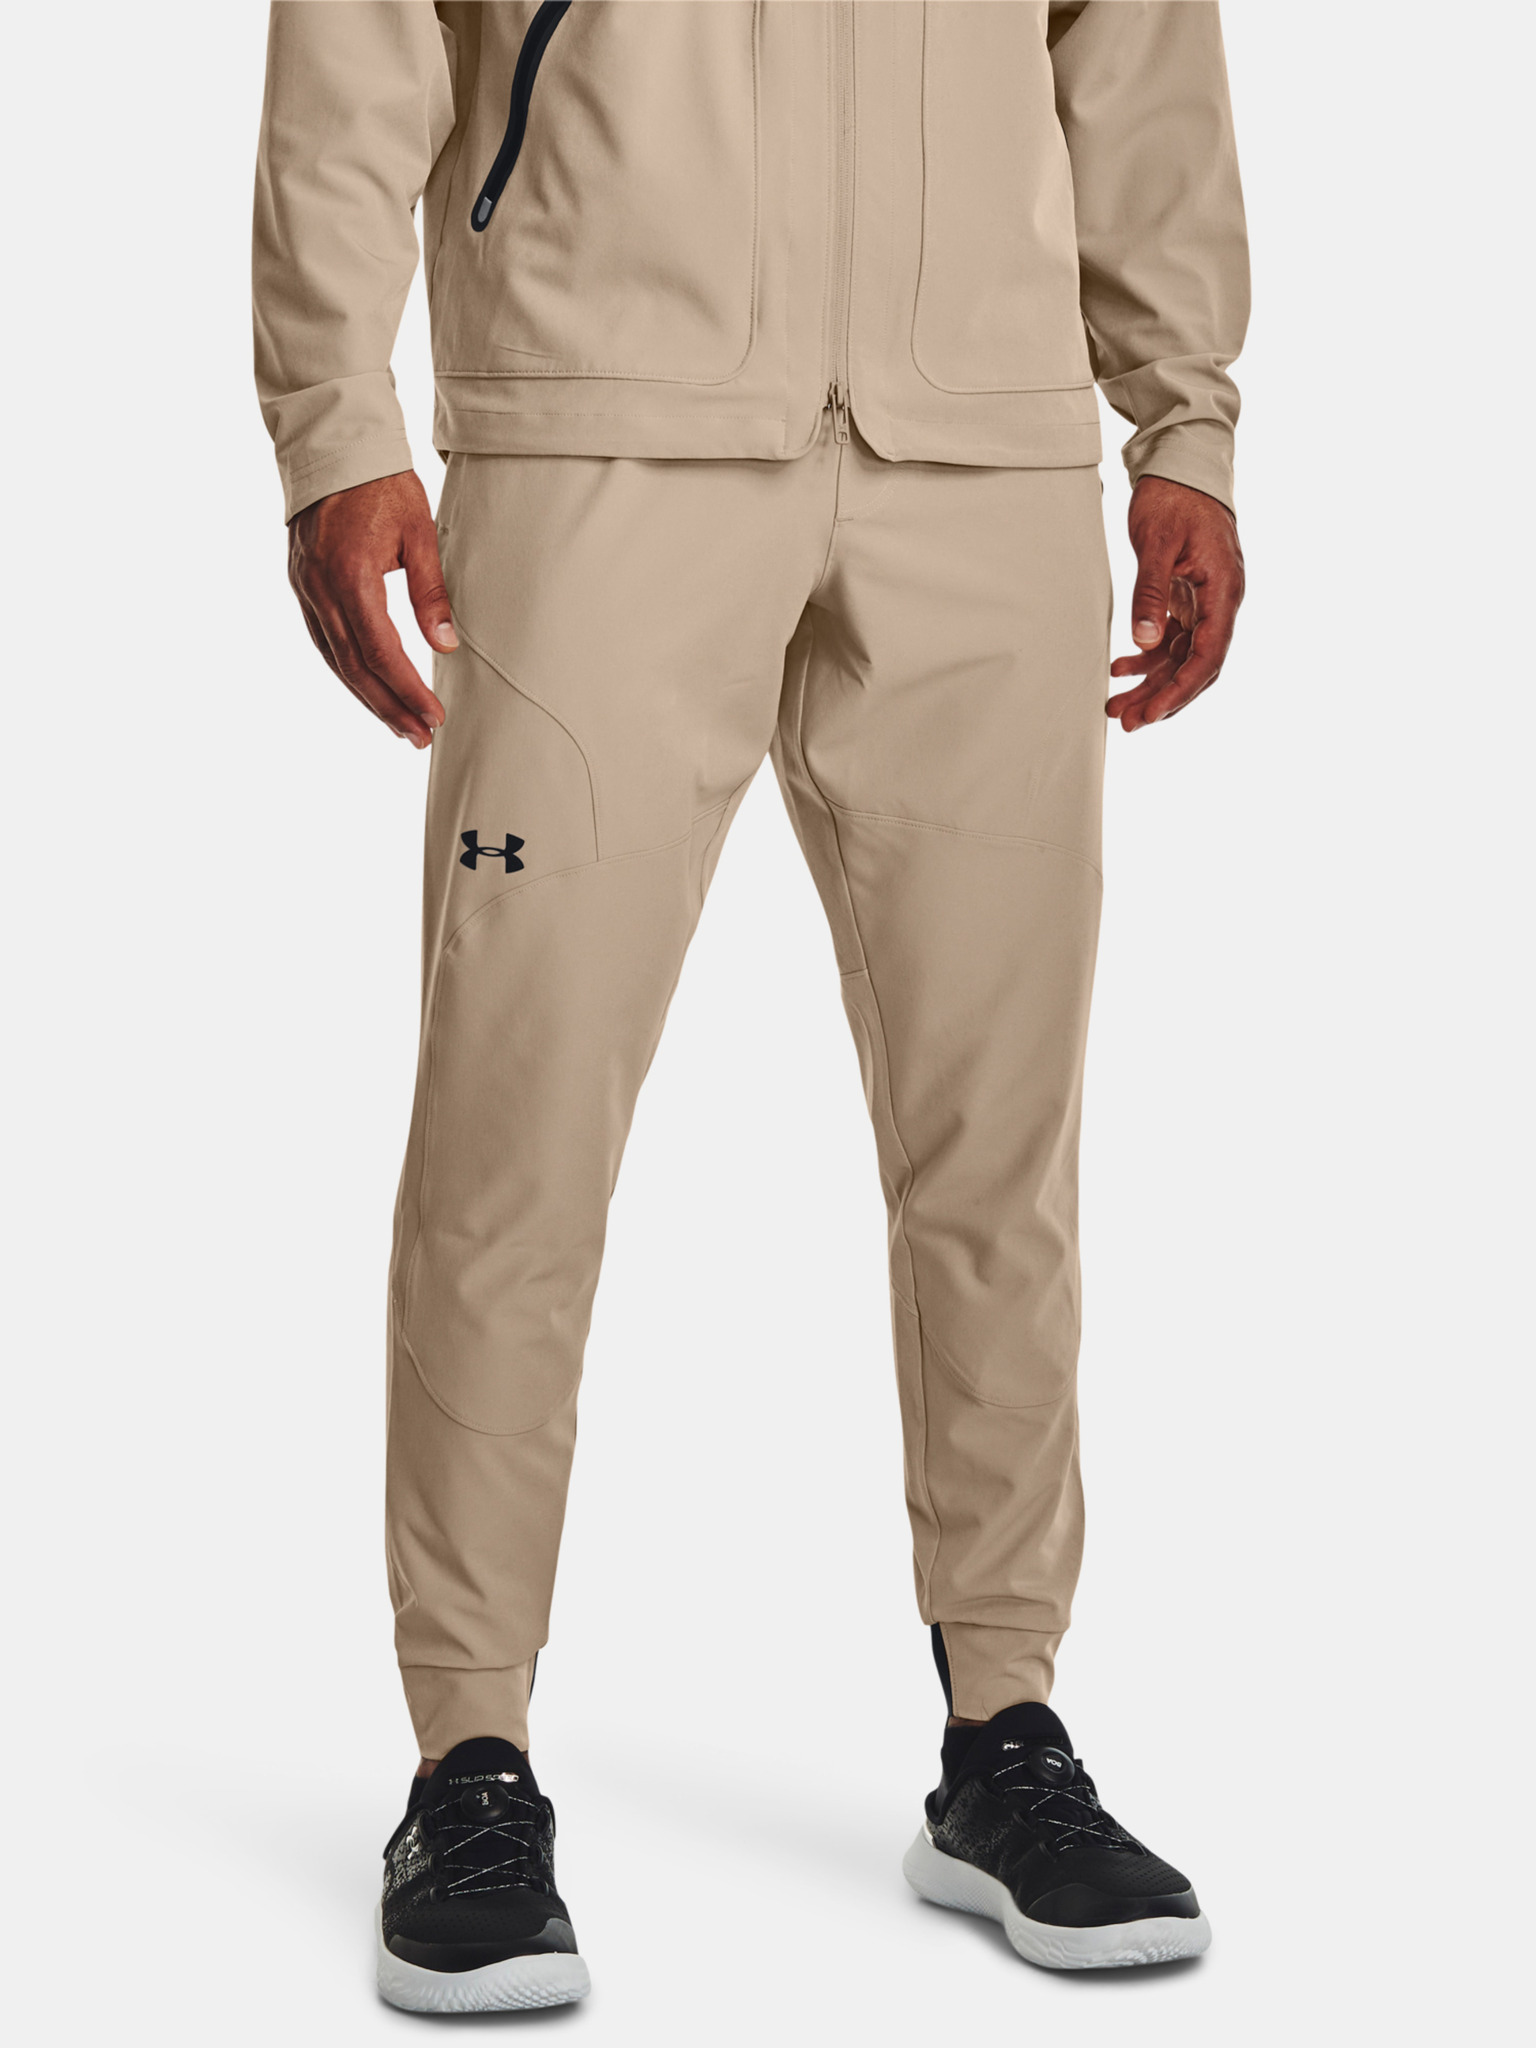 Buy Under Armour Sport Woven Pants from Next Luxembourg